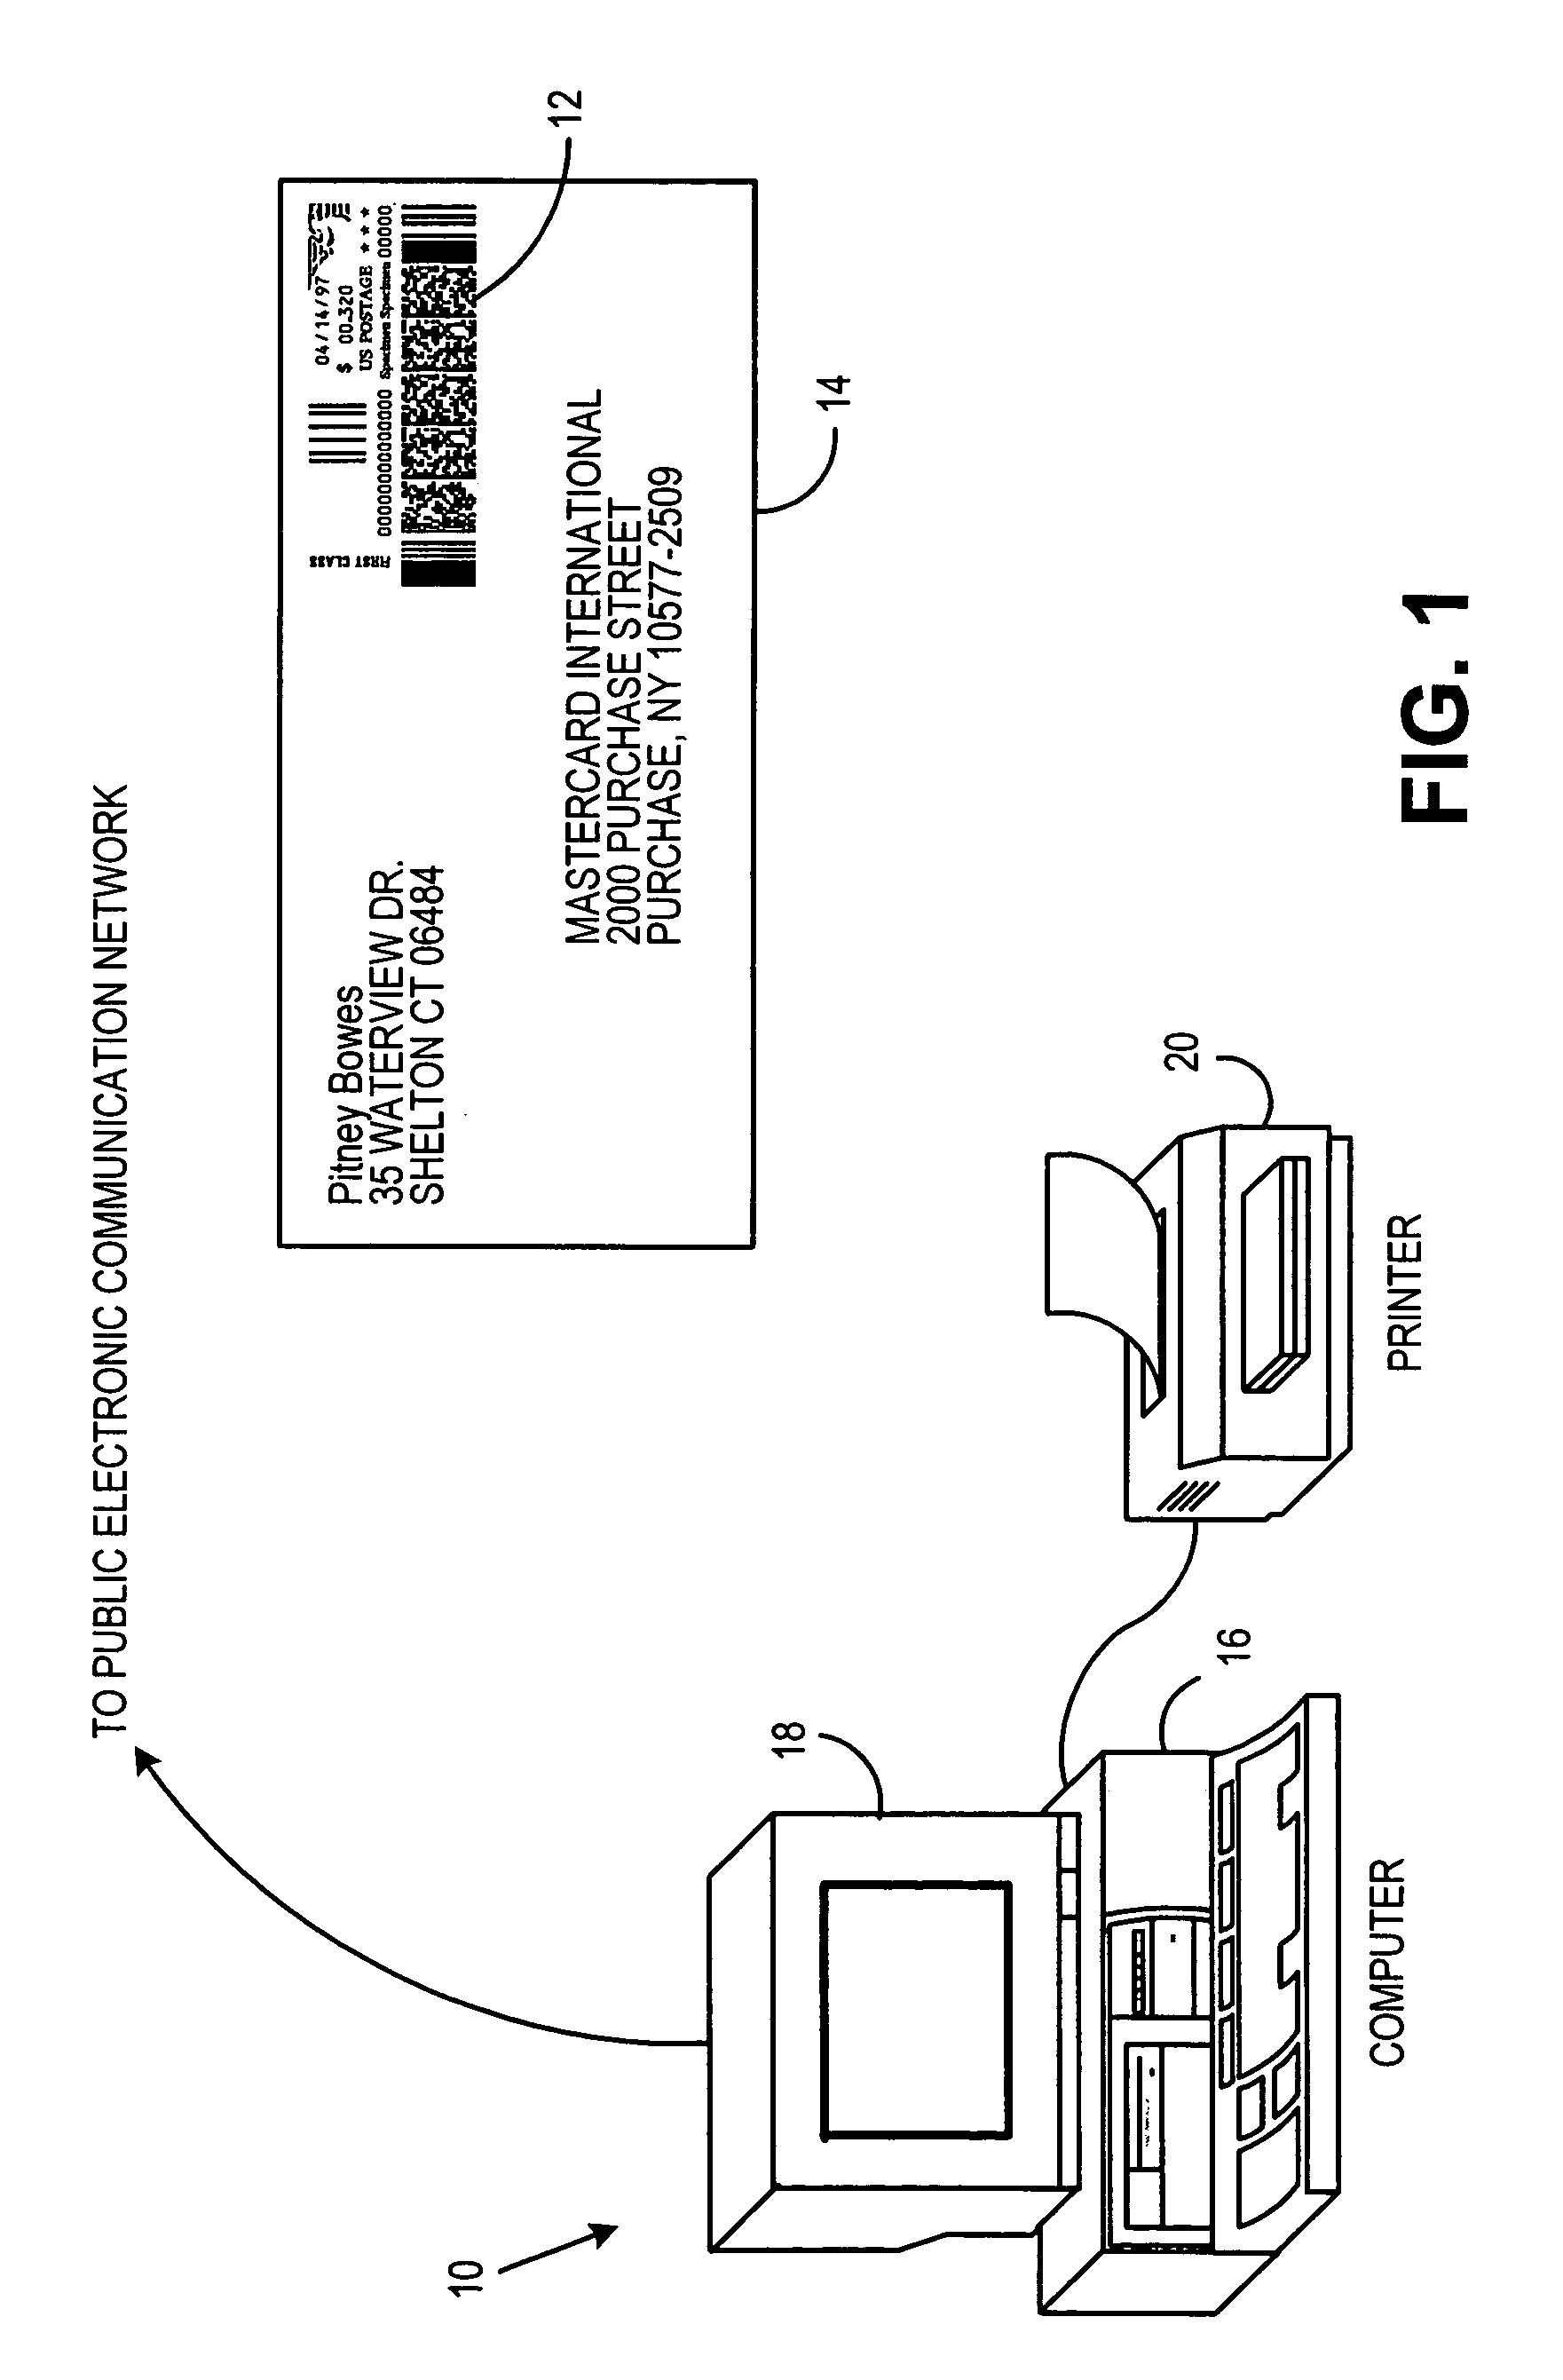 Method and system for providing value-added services